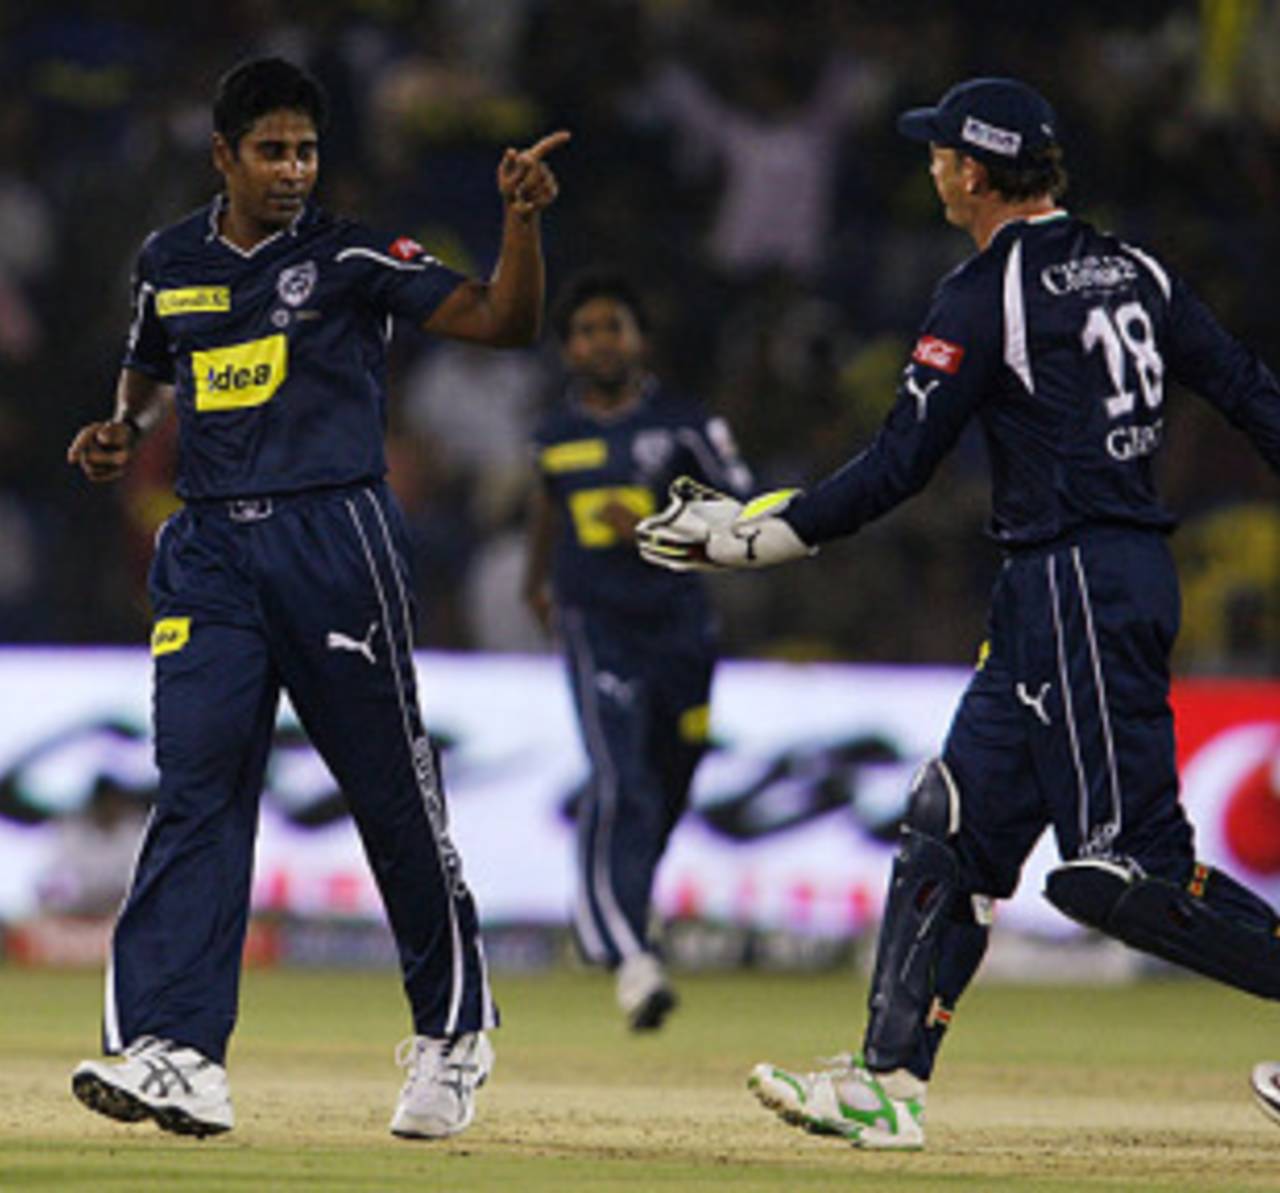 Chaminda Vaas proved his worth in the recently-concluded IPL season&nbsp;&nbsp;&bull;&nbsp;&nbsp;Indian Premier League